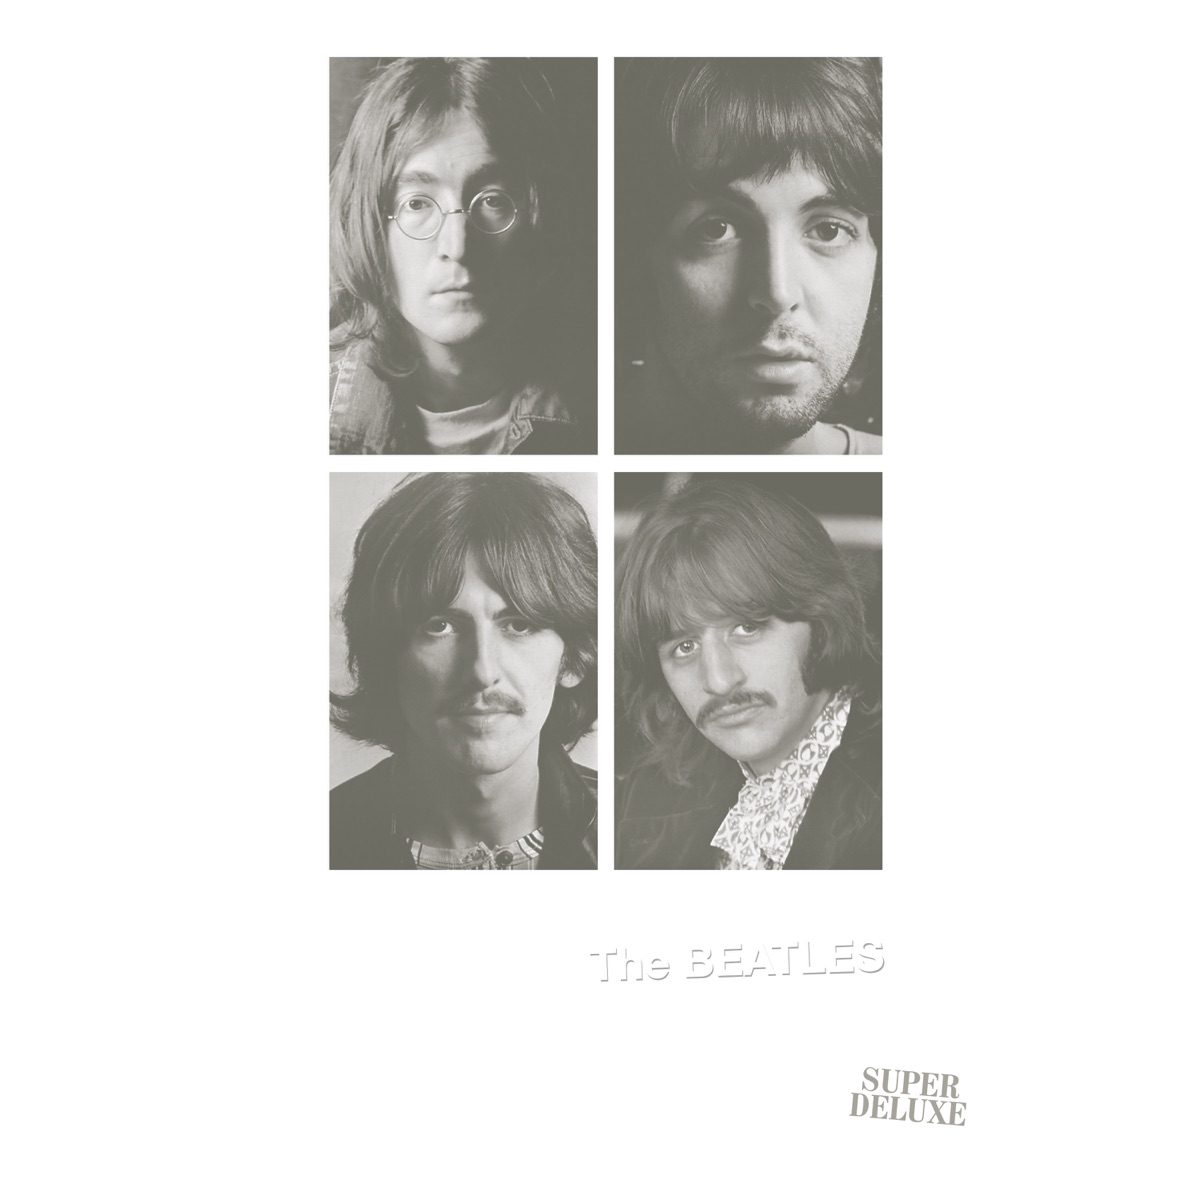 The Beatles (The White Album) by The Beatles on Apple Music